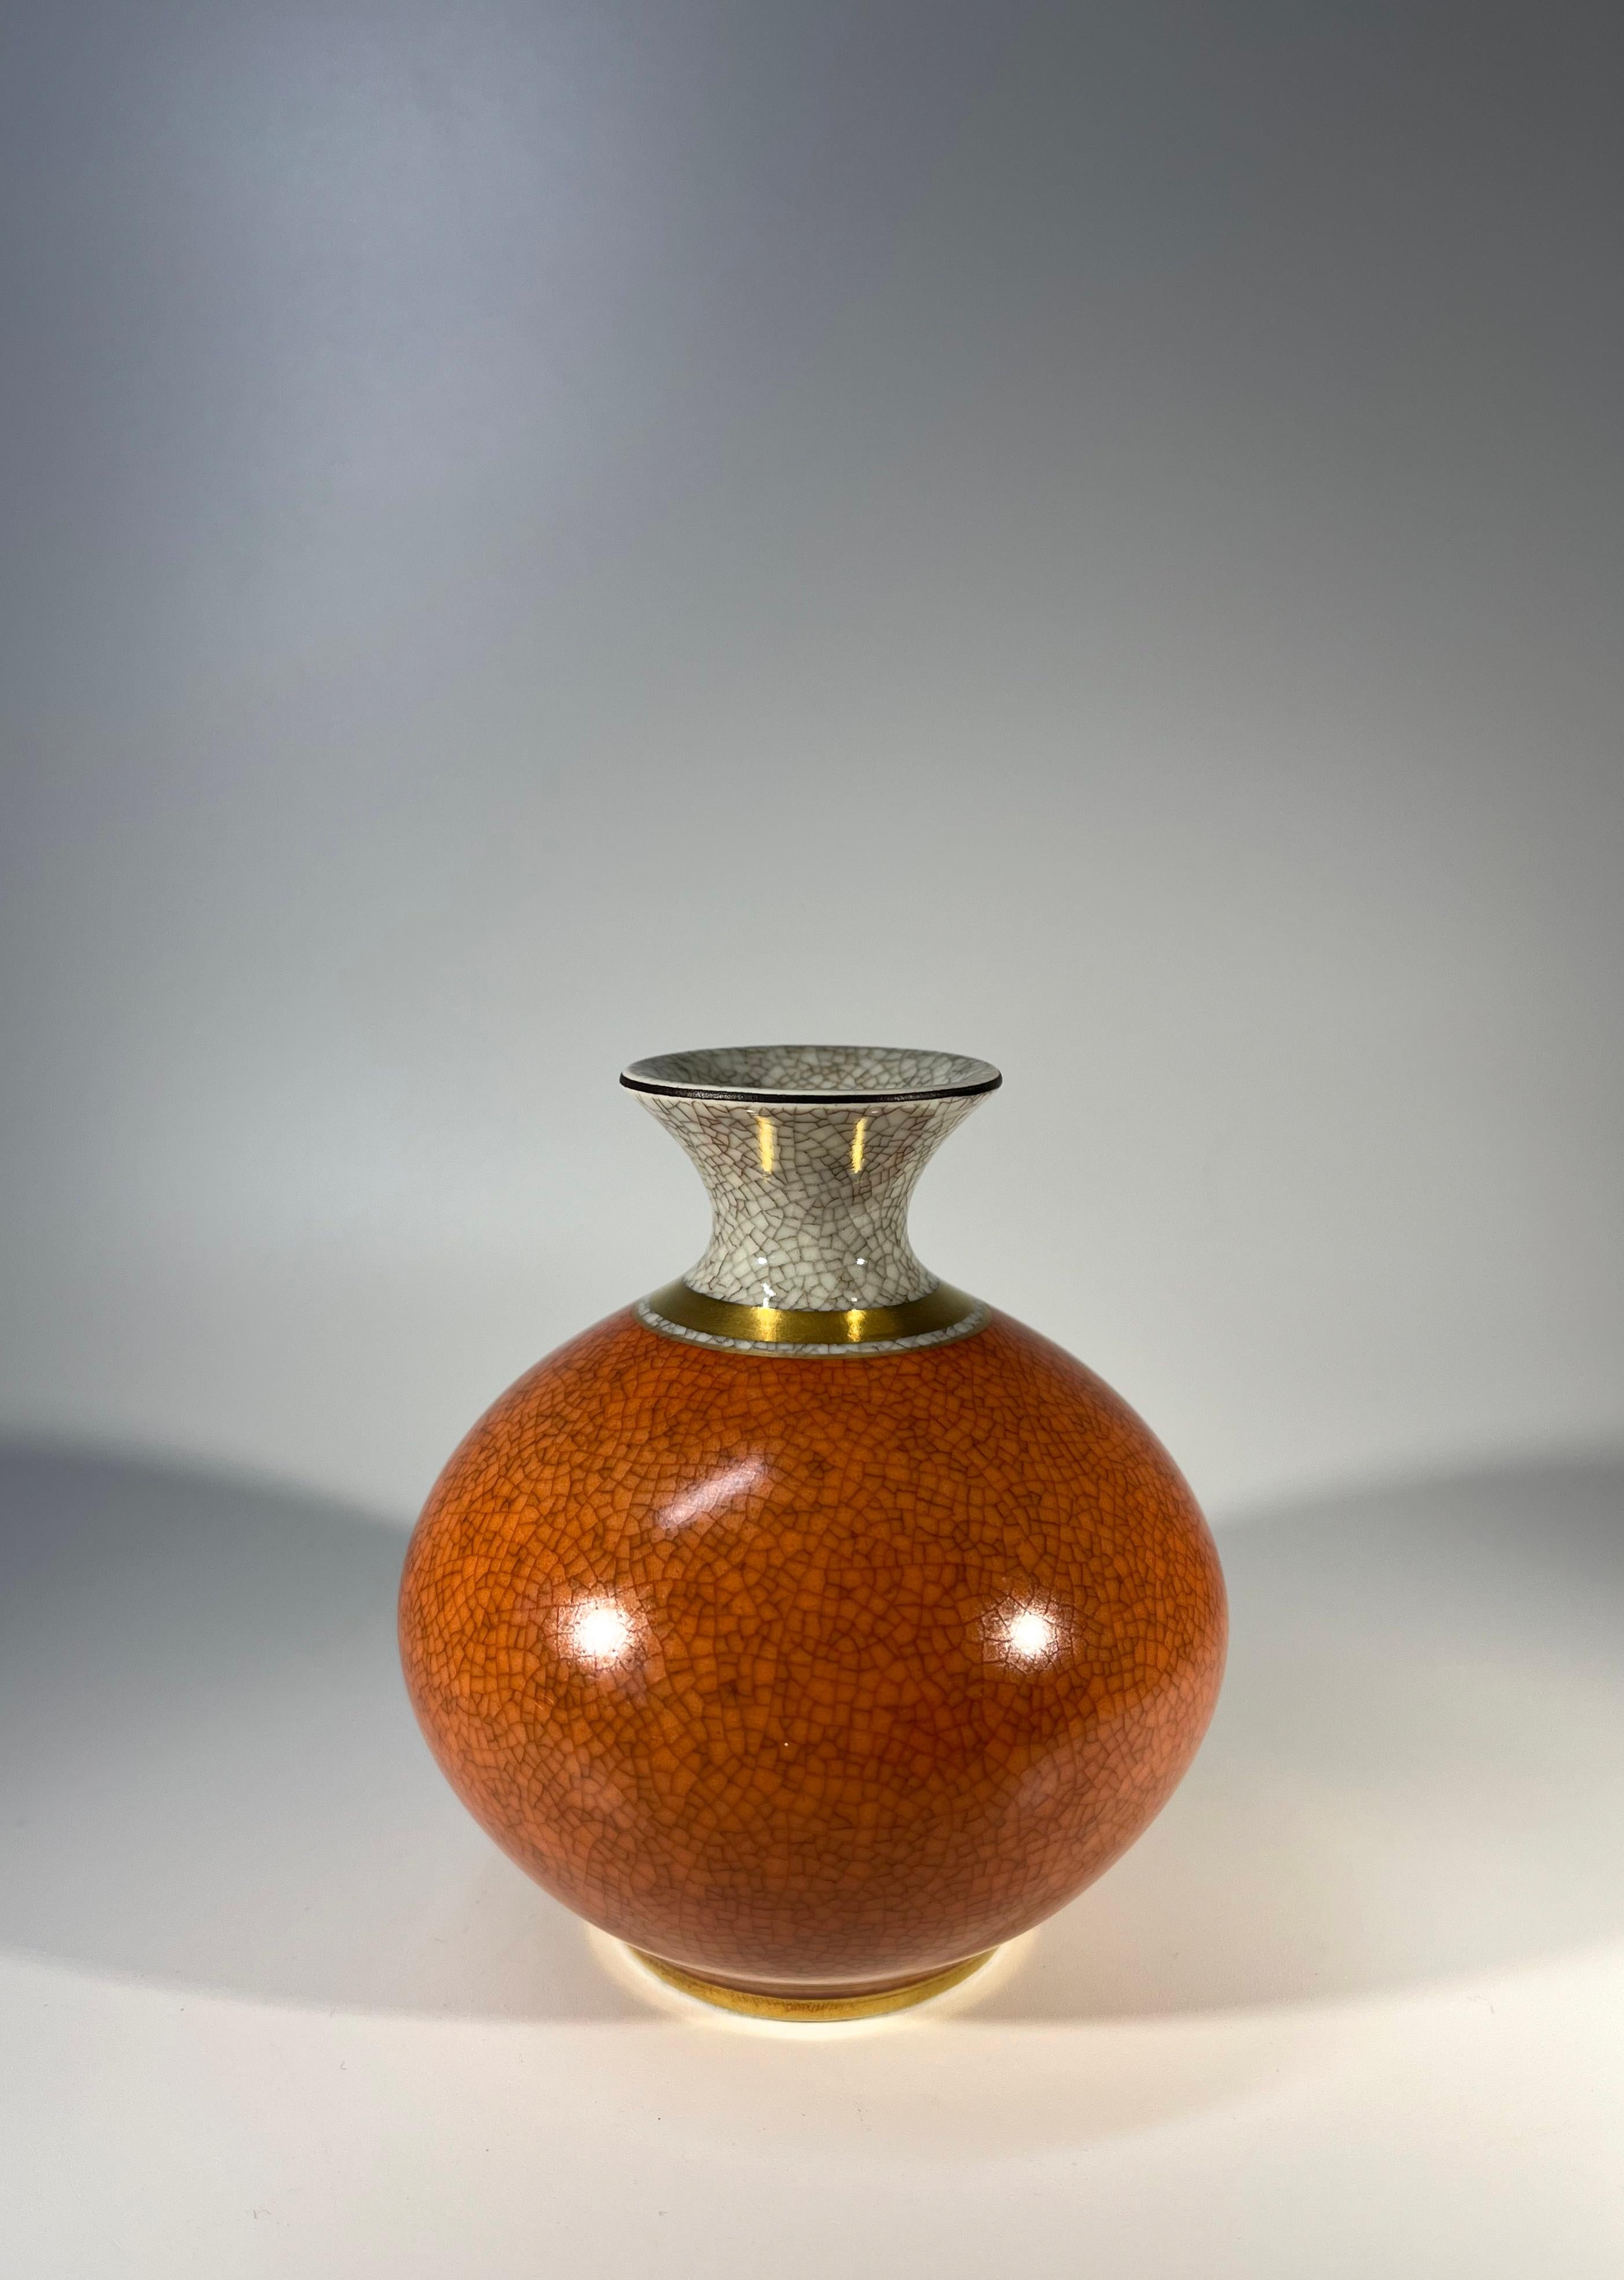 Royal Copenhagen Terracotta Crackle Glaze Porcelain Vase #2353 In Excellent Condition In Rothley, Leicestershire